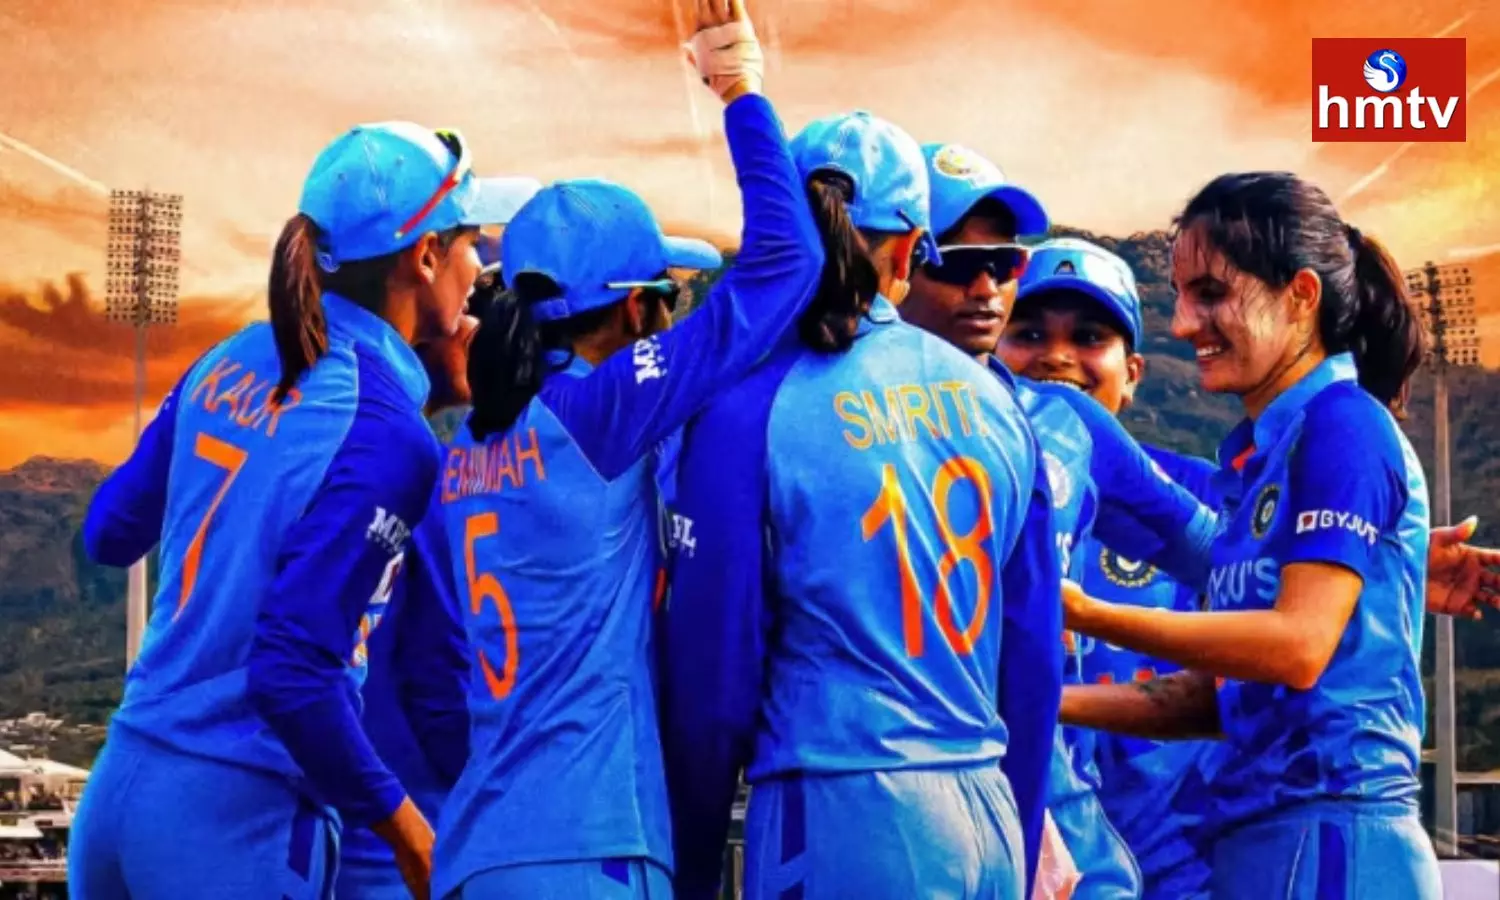 ICC Women T20 World Cup